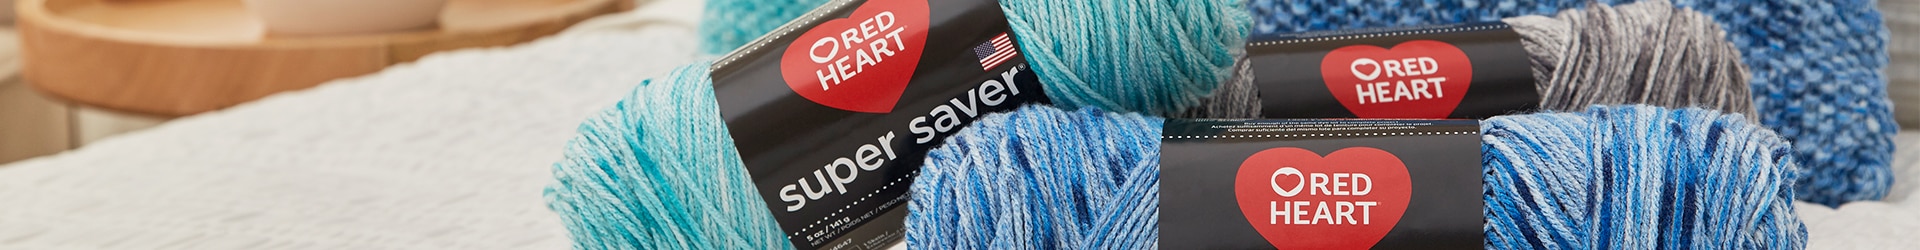 Knit or crochet your next project with America's favorite yarn, Red Heart & get inspired with JOANN.